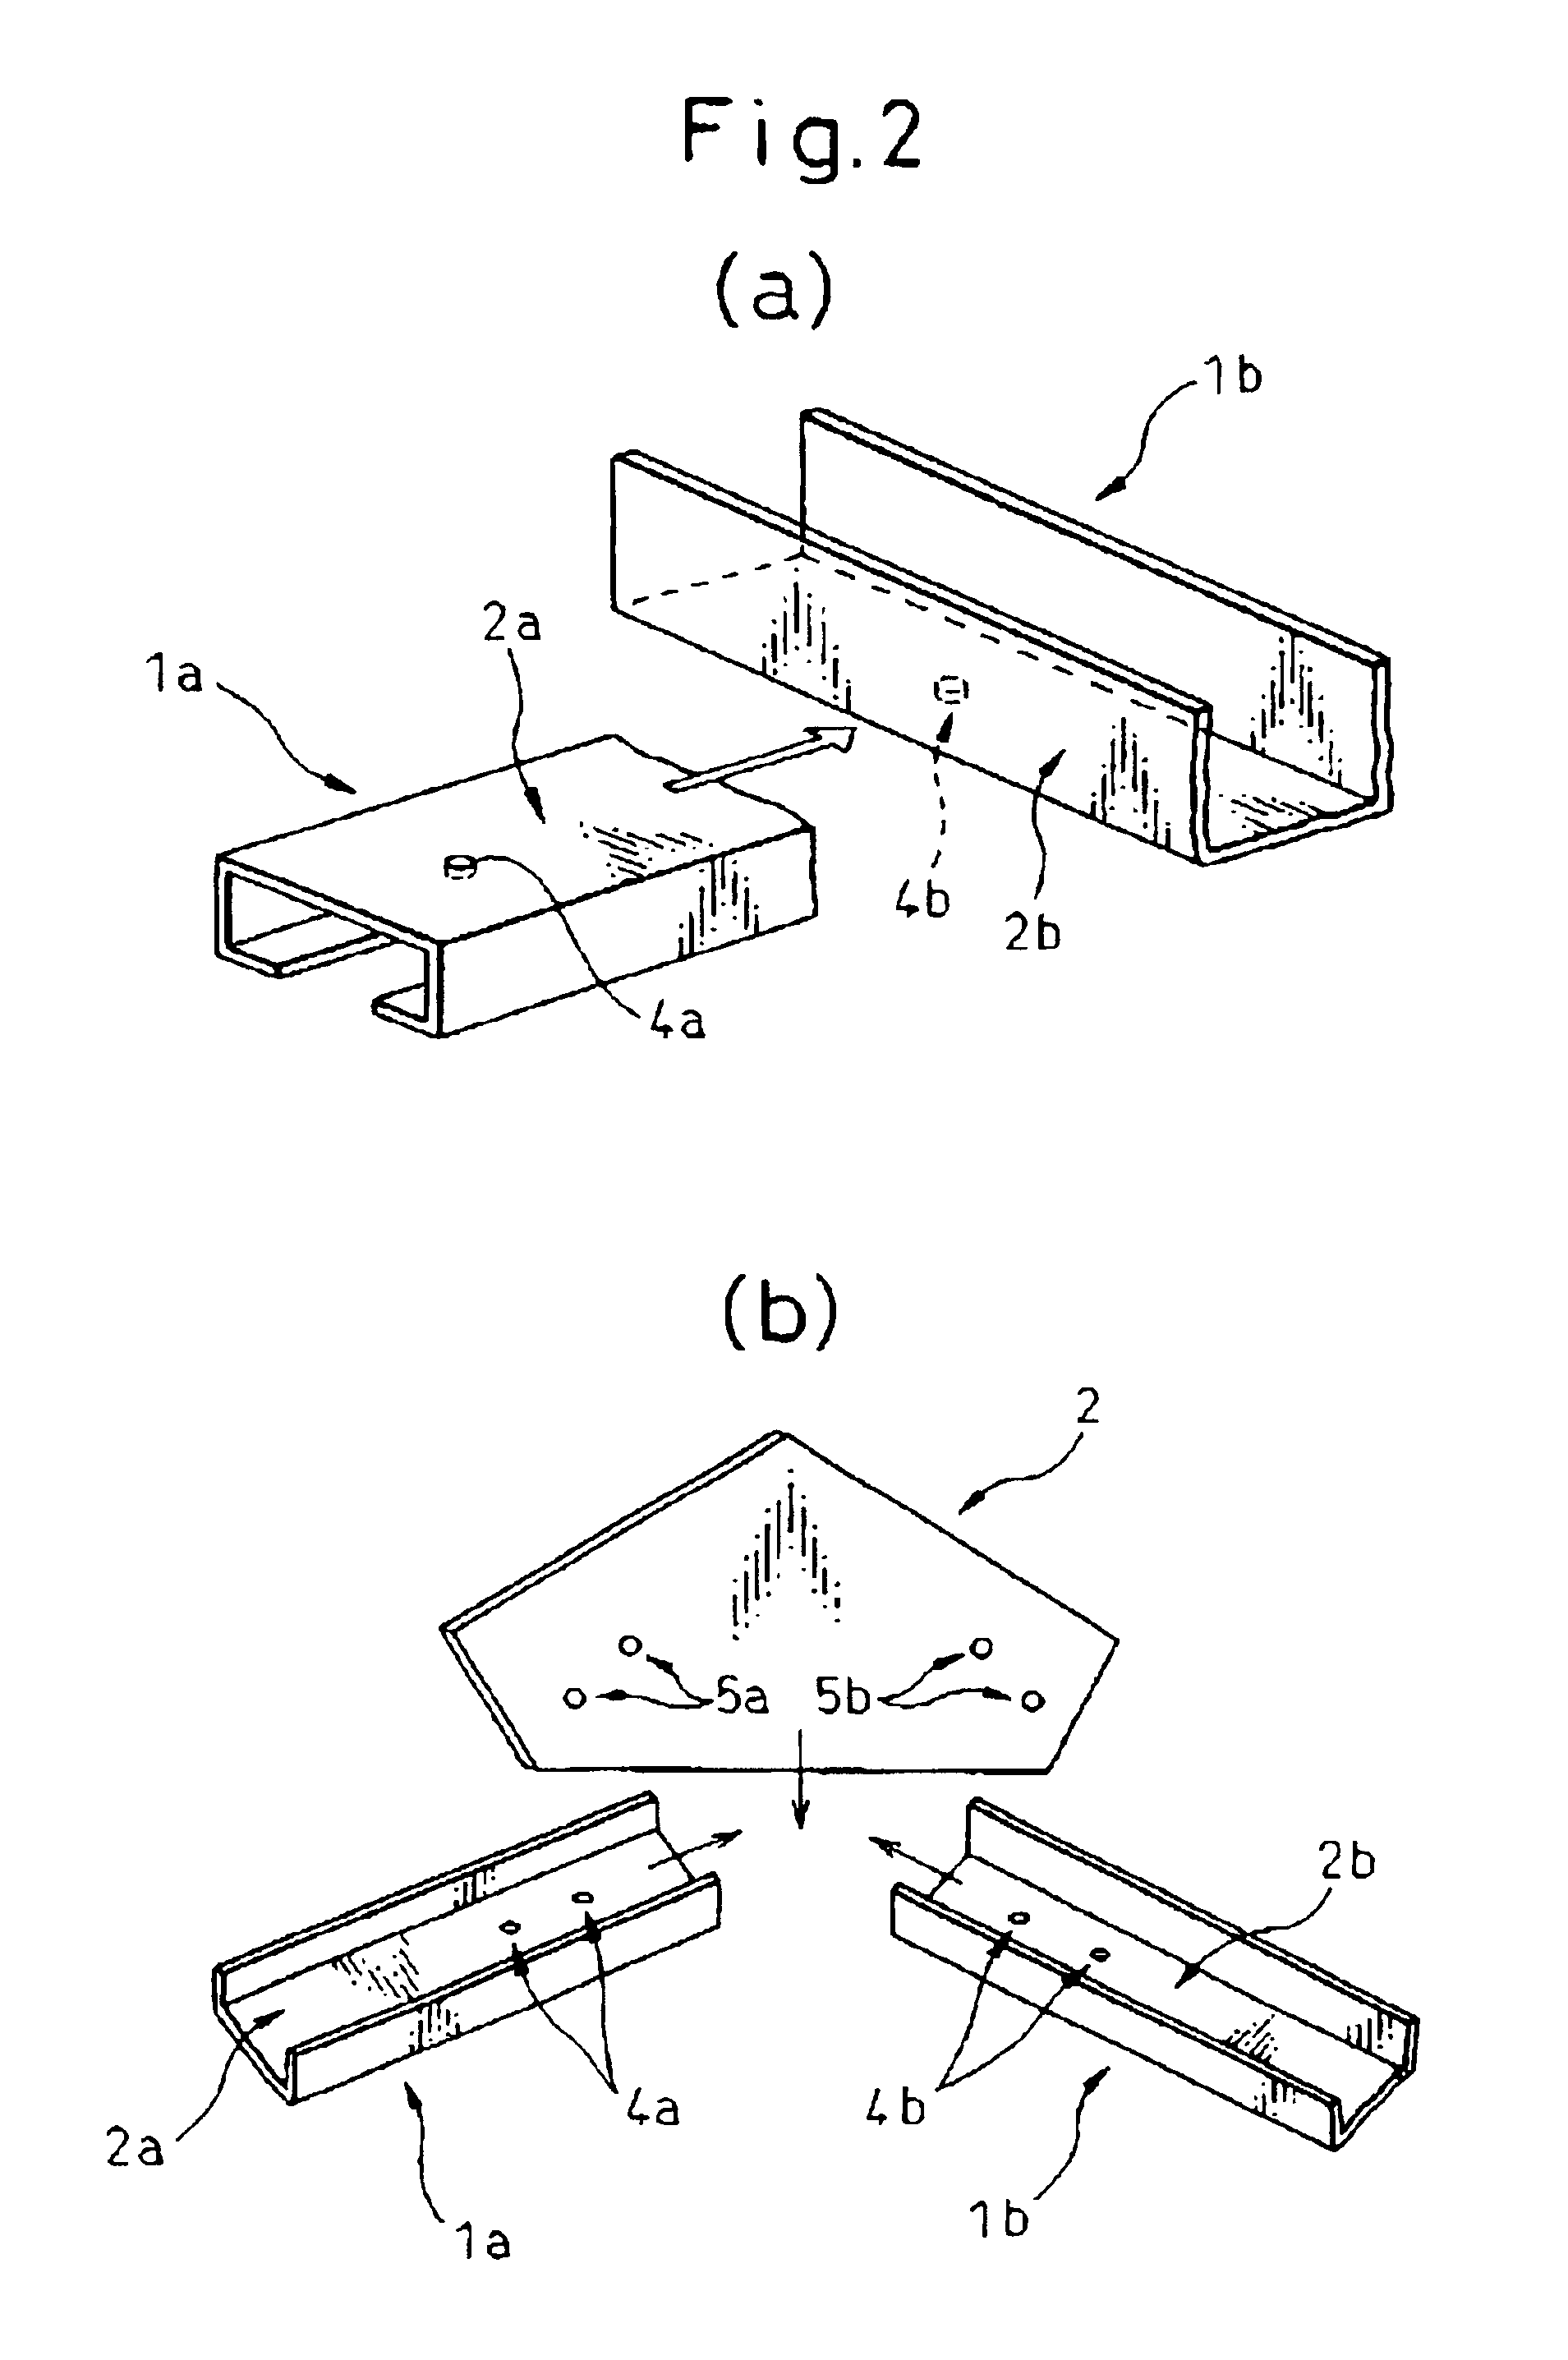 Method for assembling building with thin and lightweight shaped-steel members